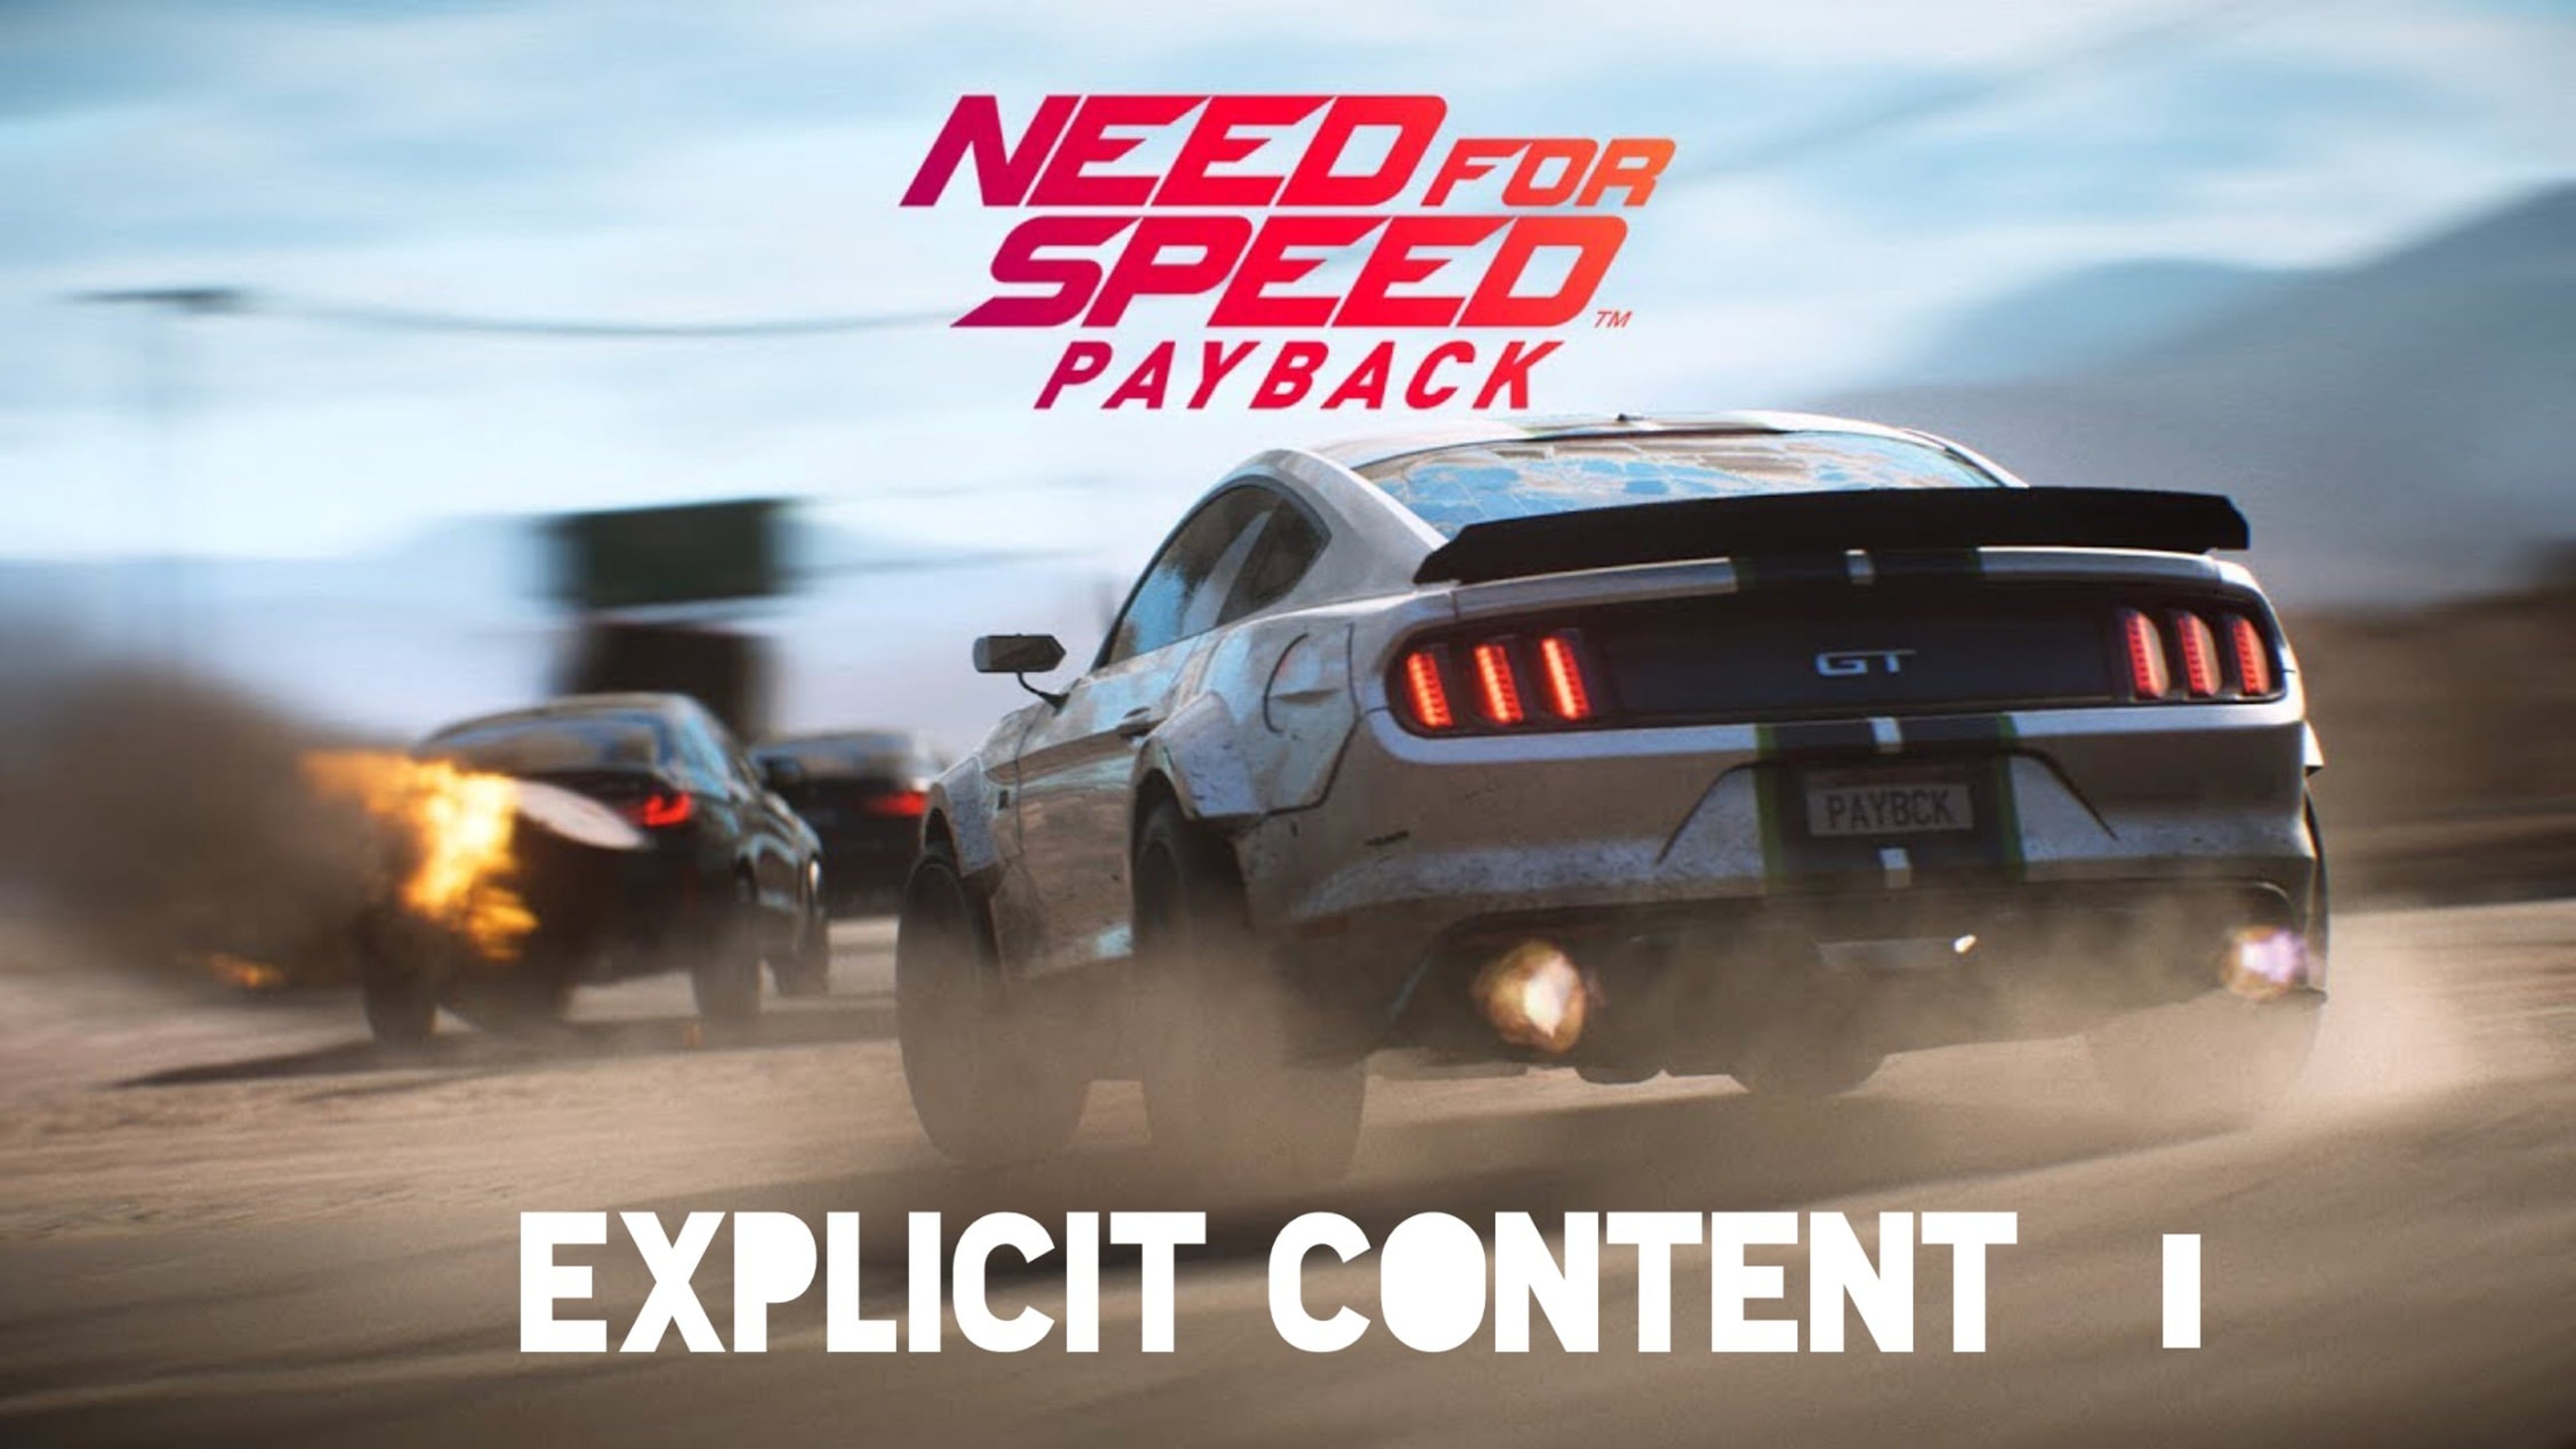 Explicit Content : Need for speed Payback